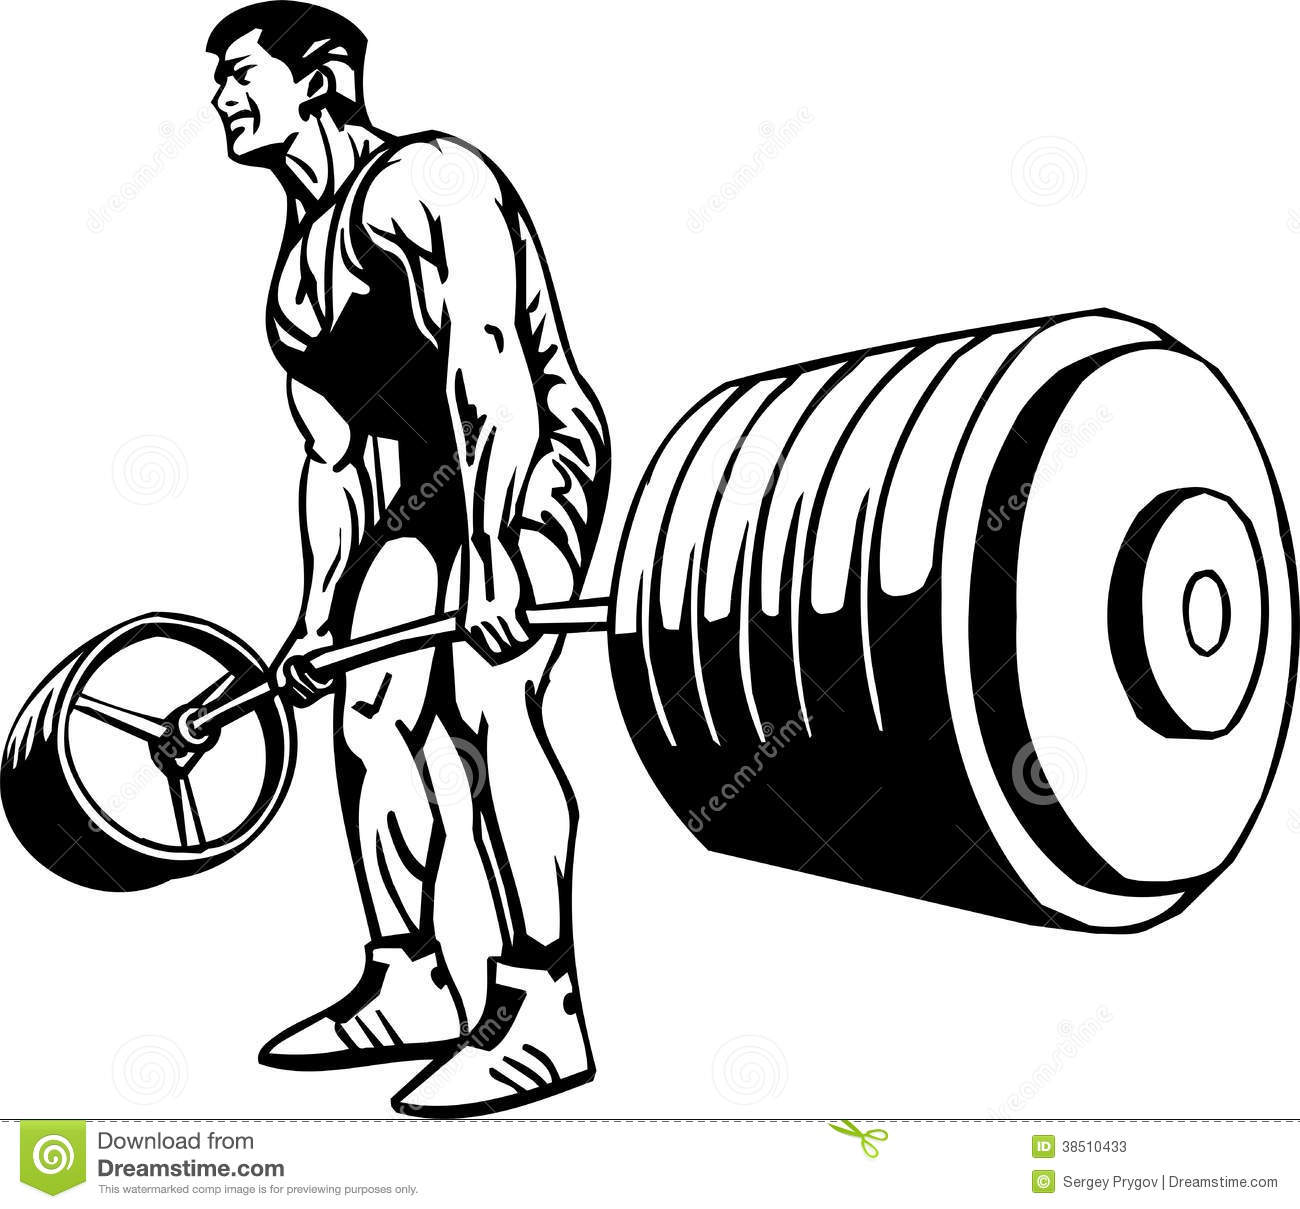 Bodybuilding And Powerlifting   Vector  Stock Photos   Image  38510433